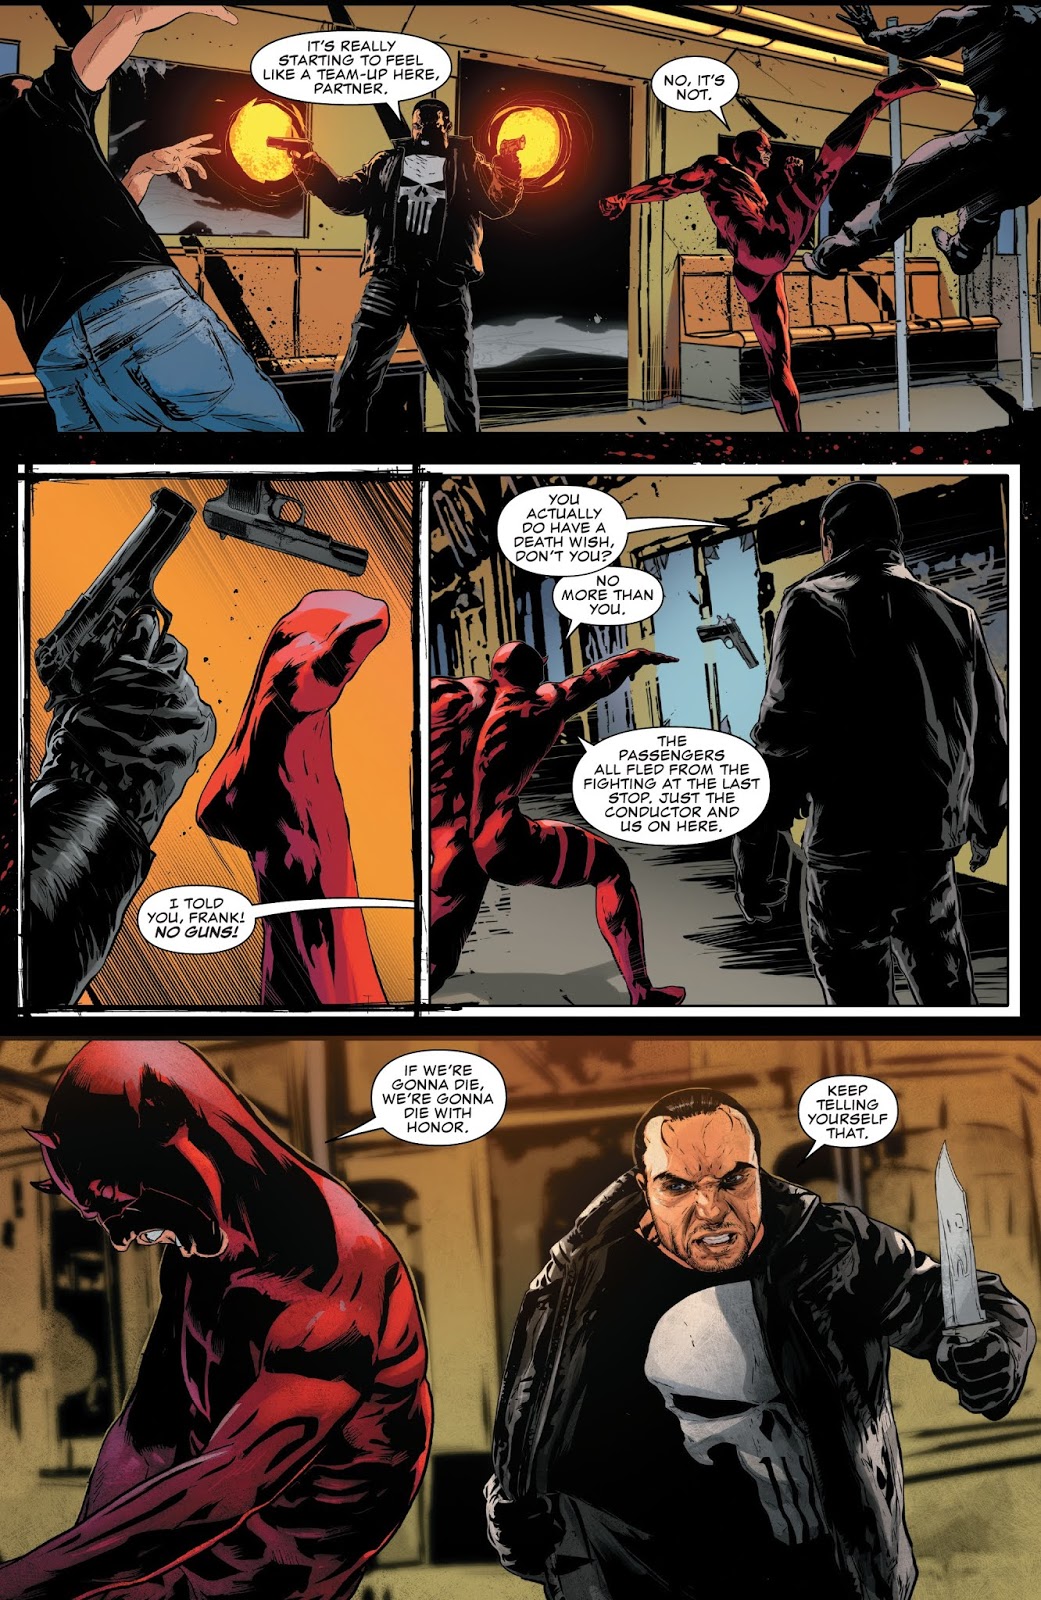 The Punisher And Daredevil Team Up (The Punisher Vol. 12 #2)